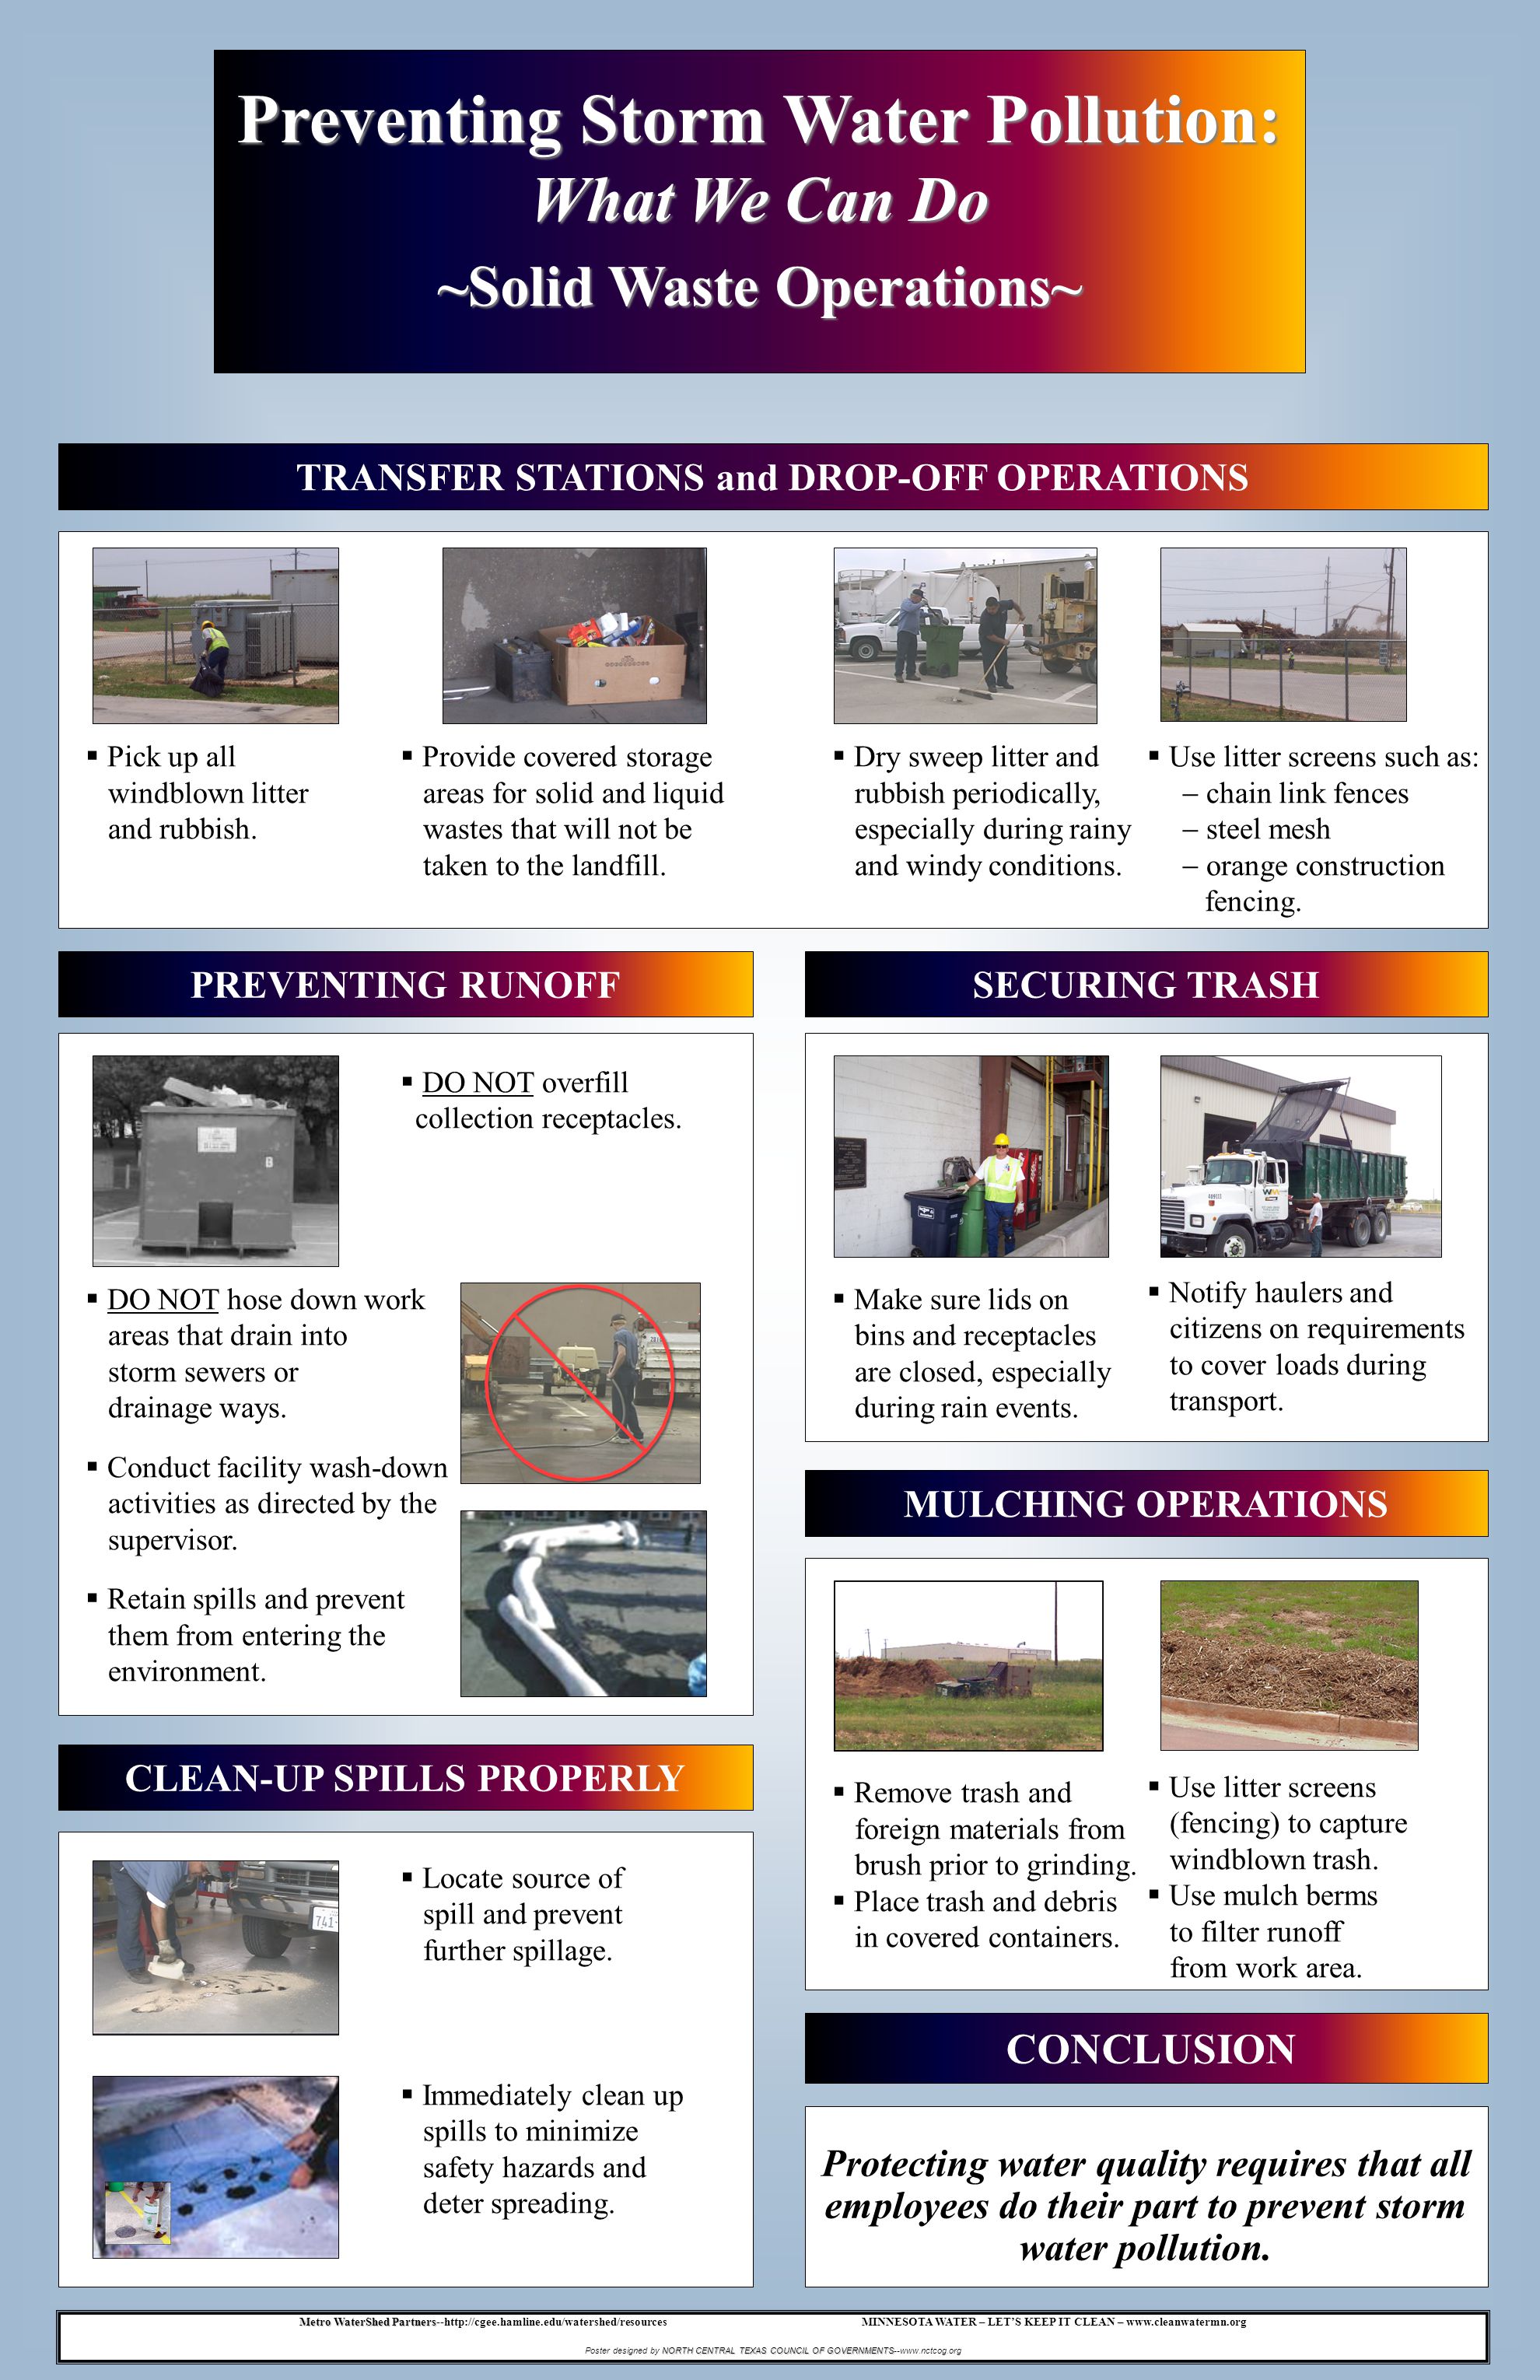 TRANSFER STATIONS and DROP-OFF OPERATIONS Protecting water quality requires that all employees do their part to prevent storm water pollution.